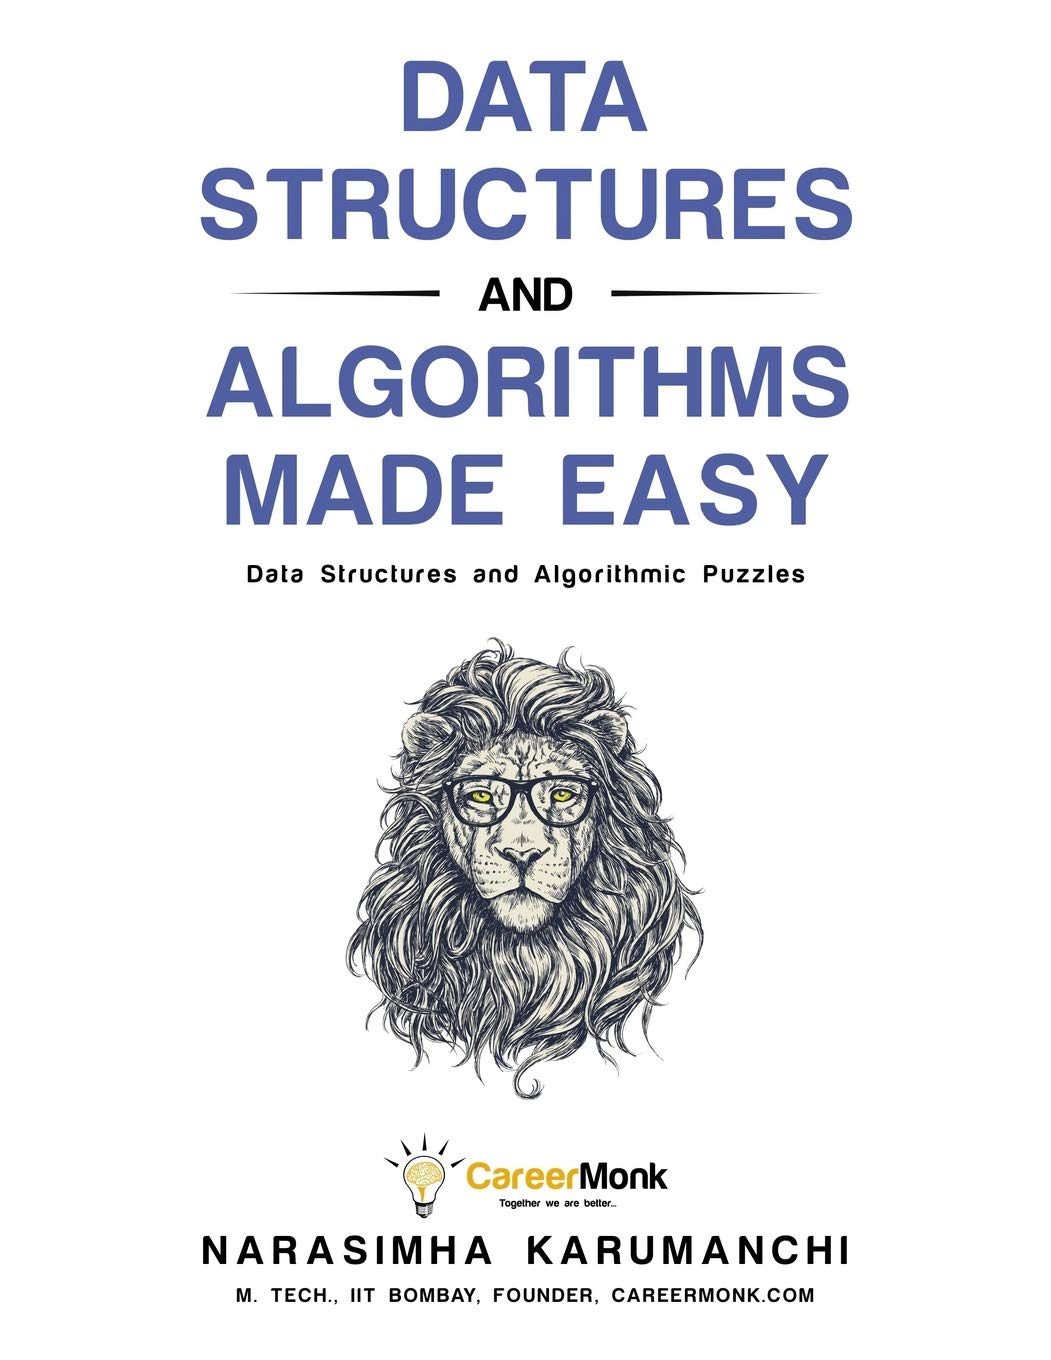 Data structures and algorithms made easy: data structures and algorithmic puzzles